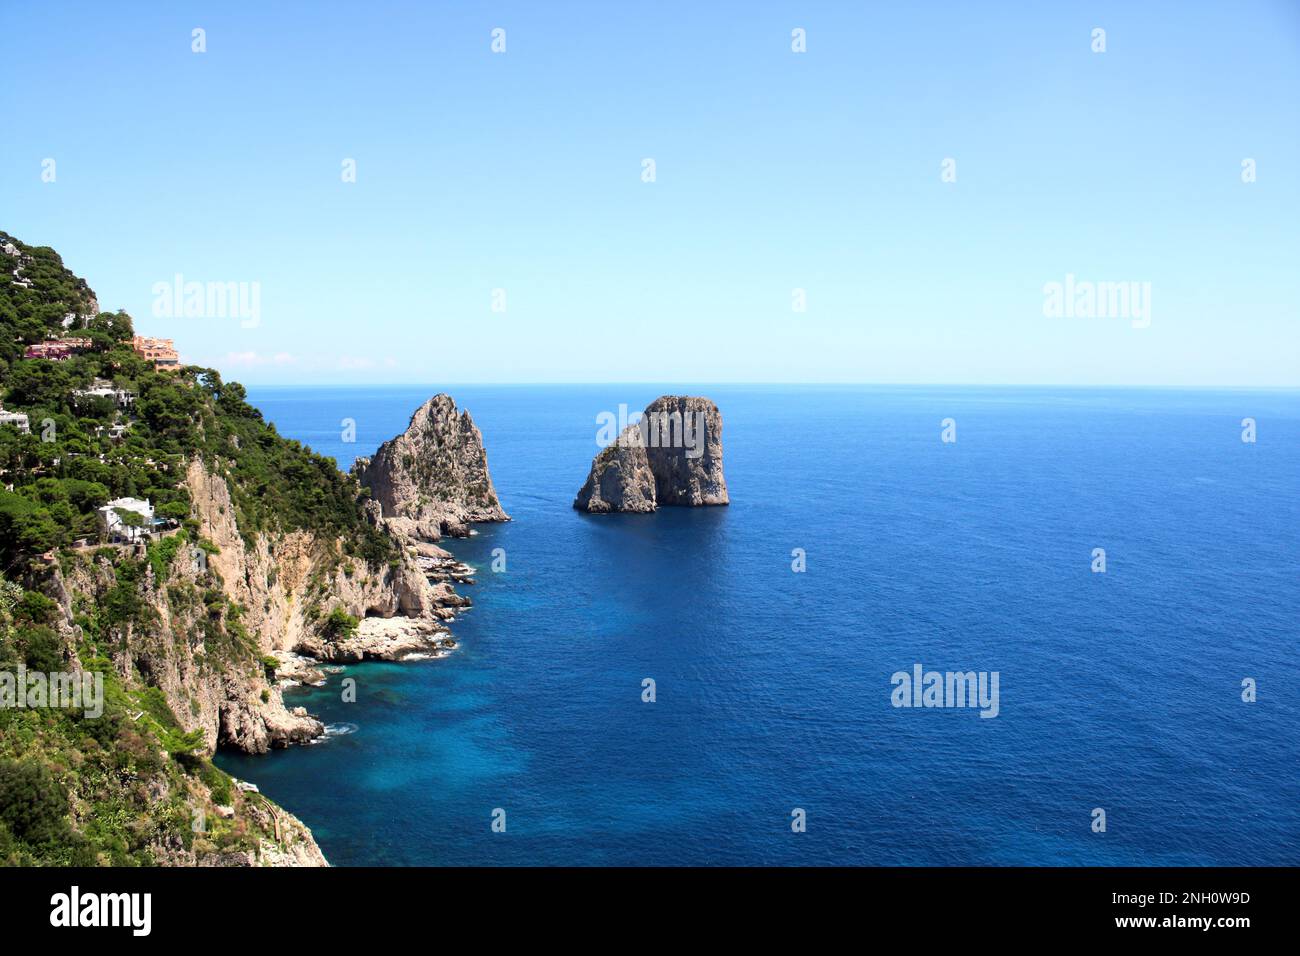 Top view on famous Faraglioni Rocks, Capri Island, Italy. Aerial view of beautiful landscape with azure sea, Capri island coastline and Faraglioni cli Stock Photo